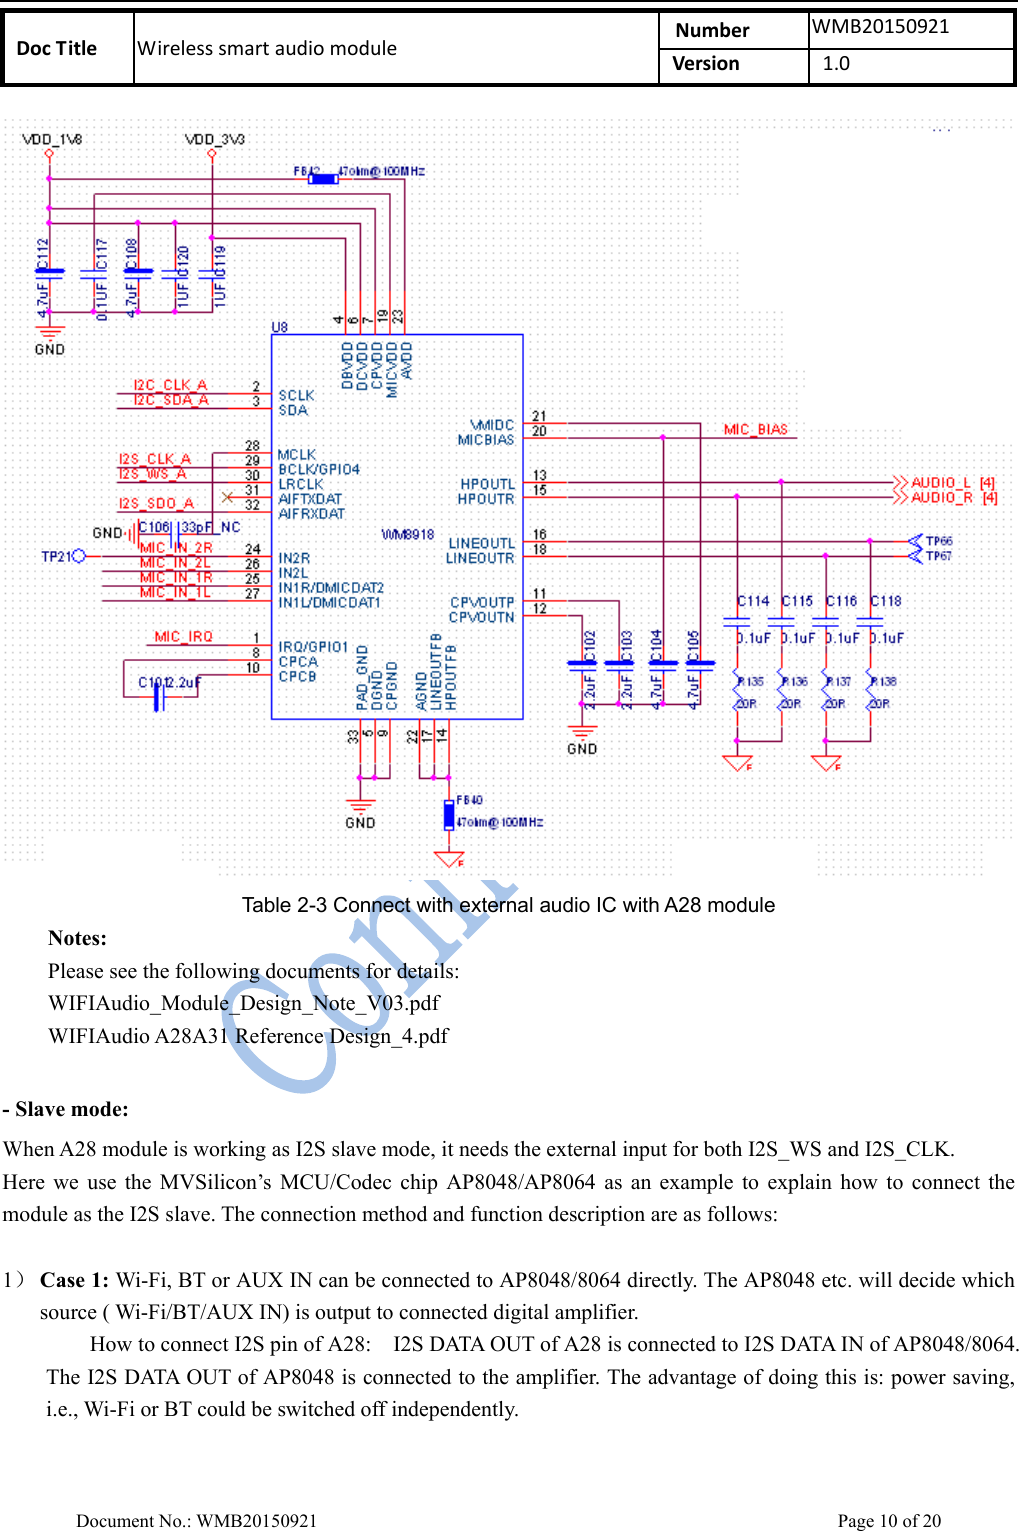    DocTitle Wirelesssmartaudiomodule Number WMB20150921Version 1.0 Document No.: WMB20150921    Page 10 of 20  Table 2-3 Connect with external audio IC with A28 module Notes: Please see the following documents for details: WIFIAudio_Module_Design_Note_V03.pdf WIFIAudio A28A31 Reference Design_4.pdf  - Slave mode: When A28 module is working as I2S slave mode, it needs the external input for both I2S_WS and I2S_CLK. Here  we  use  the  MVSilicon’s  MCU/Codec  chip  AP8048/AP8064  as  an  example  to  explain  how  to  connect  the module as the I2S slave. The connection method and function description are as follows:  1） Case 1: Wi-Fi, BT or AUX IN can be connected to AP8048/8064 directly. The AP8048 etc. will decide which source ( Wi-Fi/BT/AUX IN) is output to connected digital amplifier.   How to connect I2S pin of A28:    I2S DATA OUT of A28 is connected to I2S DATA IN of AP8048/8064. The I2S DATA OUT of AP8048 is connected to the amplifier. The advantage of doing this is: power saving, i.e., Wi-Fi or BT could be switched off independently.  